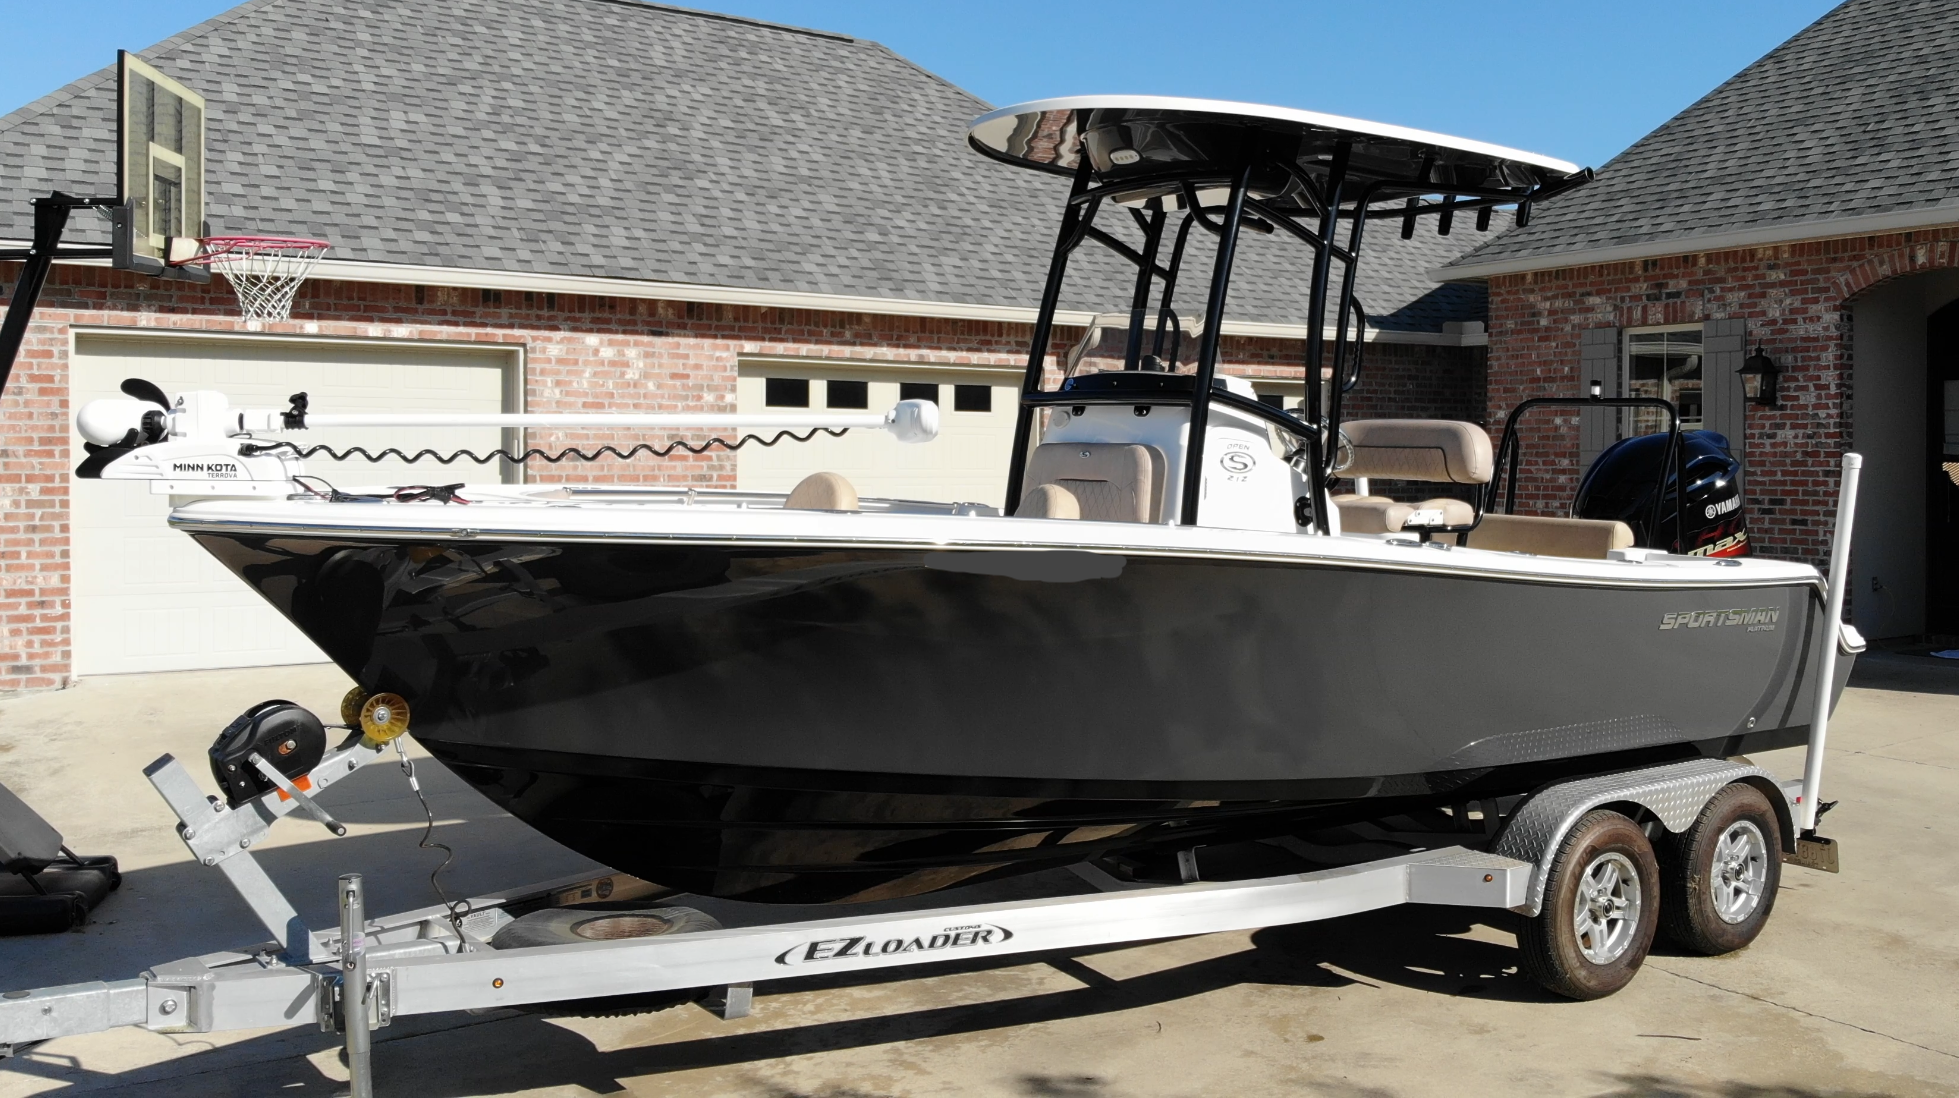 2020 Sportsman Open 212 Platinum with Yamaha 200 SHO Outboard (52hrs)